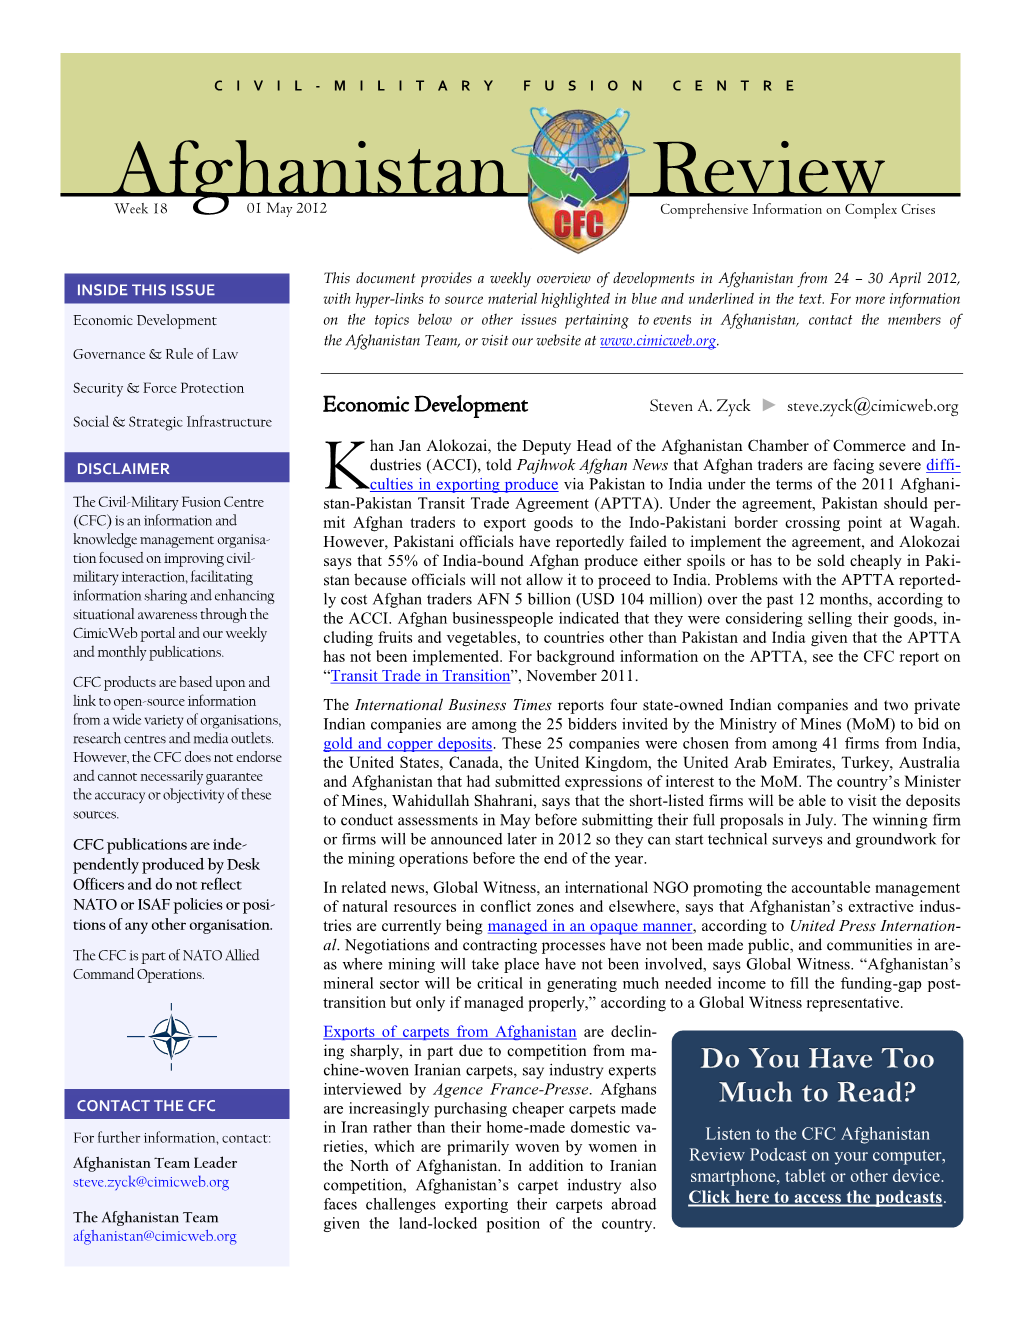 Afghanistan Review, 01 May 2012